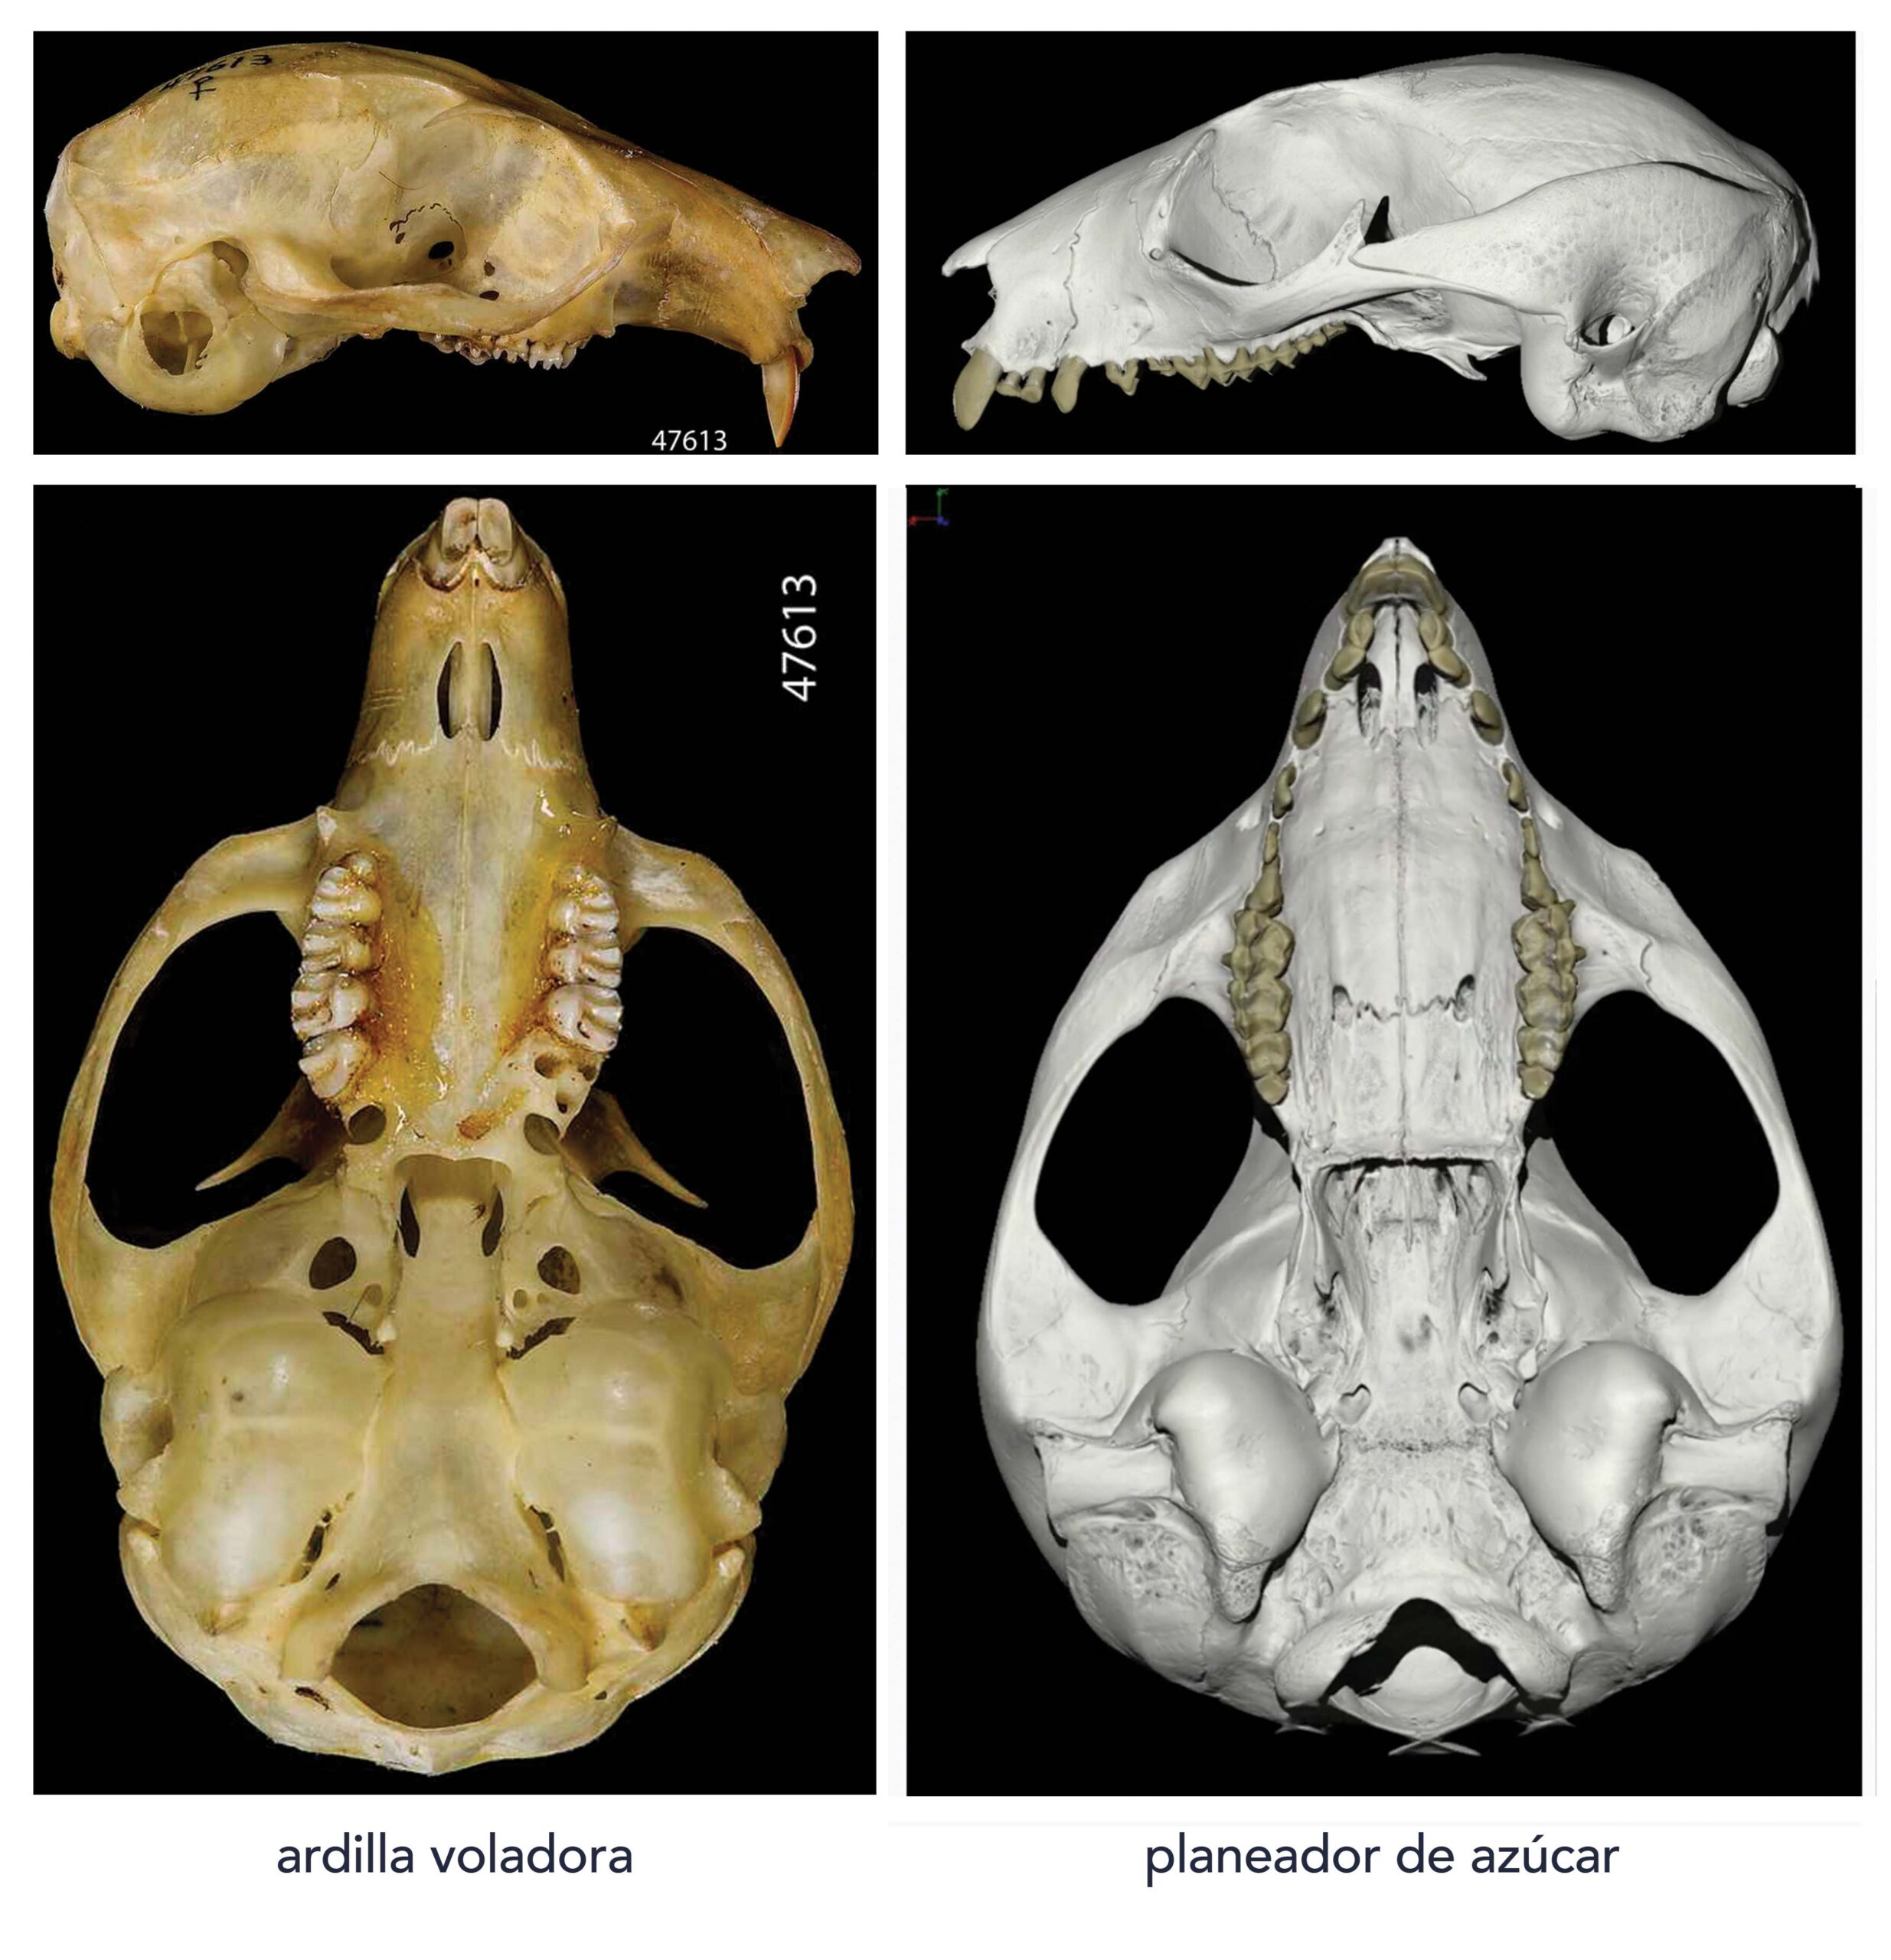 Comparison of sugar glider and squirrel skull demonstrating differences in tooth number and holes in palates.